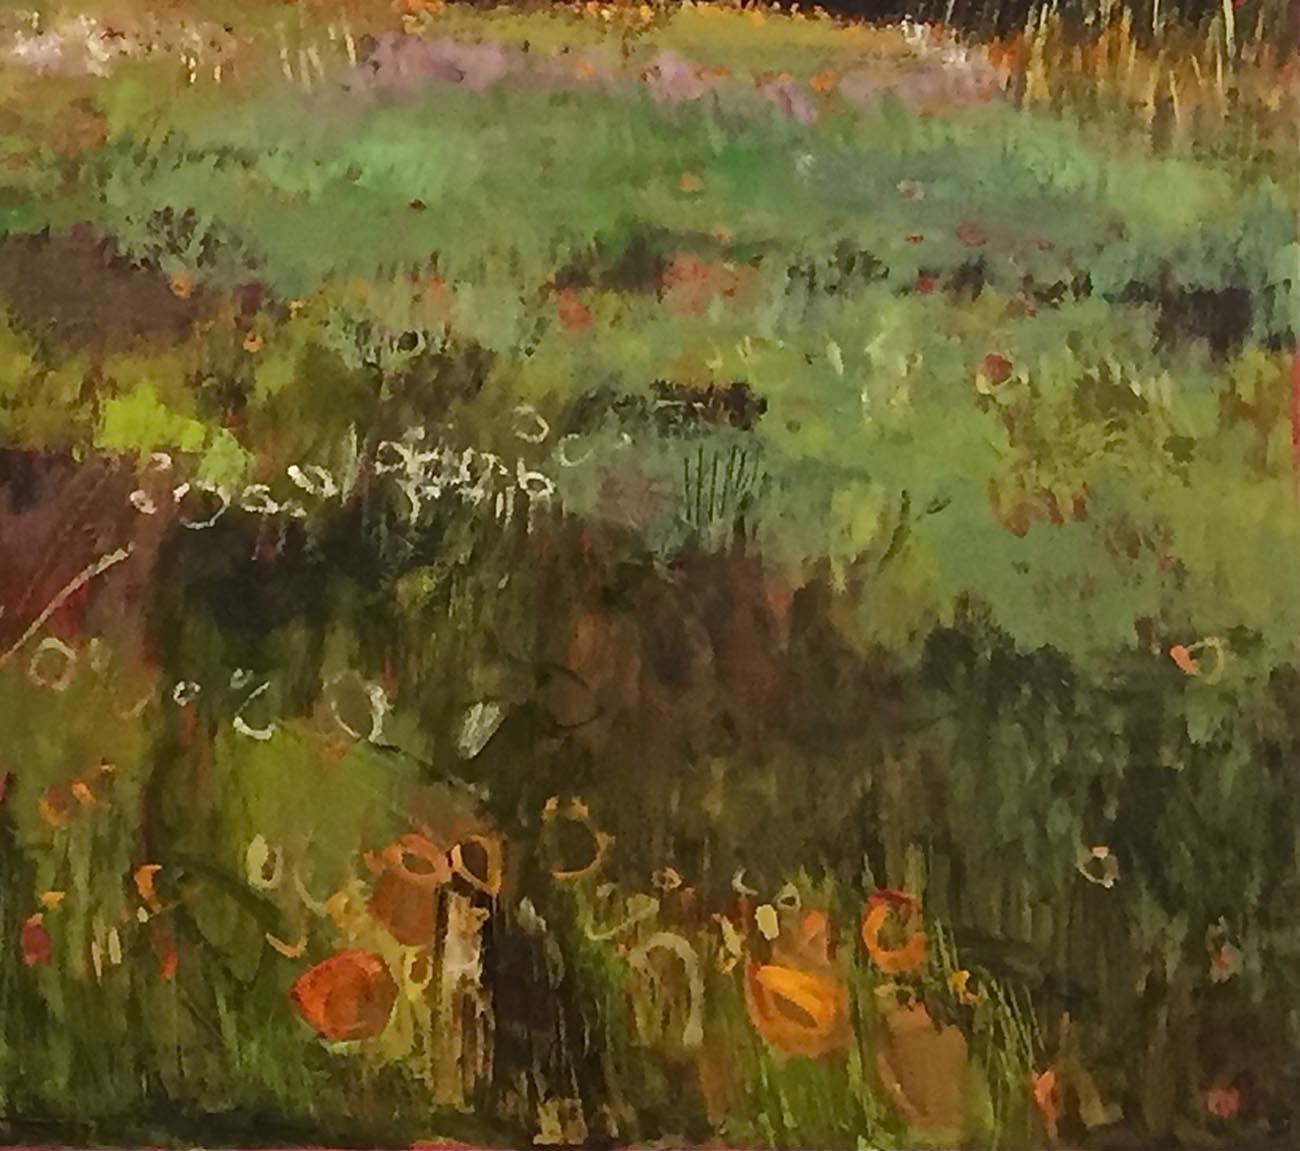 Tuscany Meadow with Orange and White Flowers, abstract oil painting – Painting von Elaine Kazimierczuk